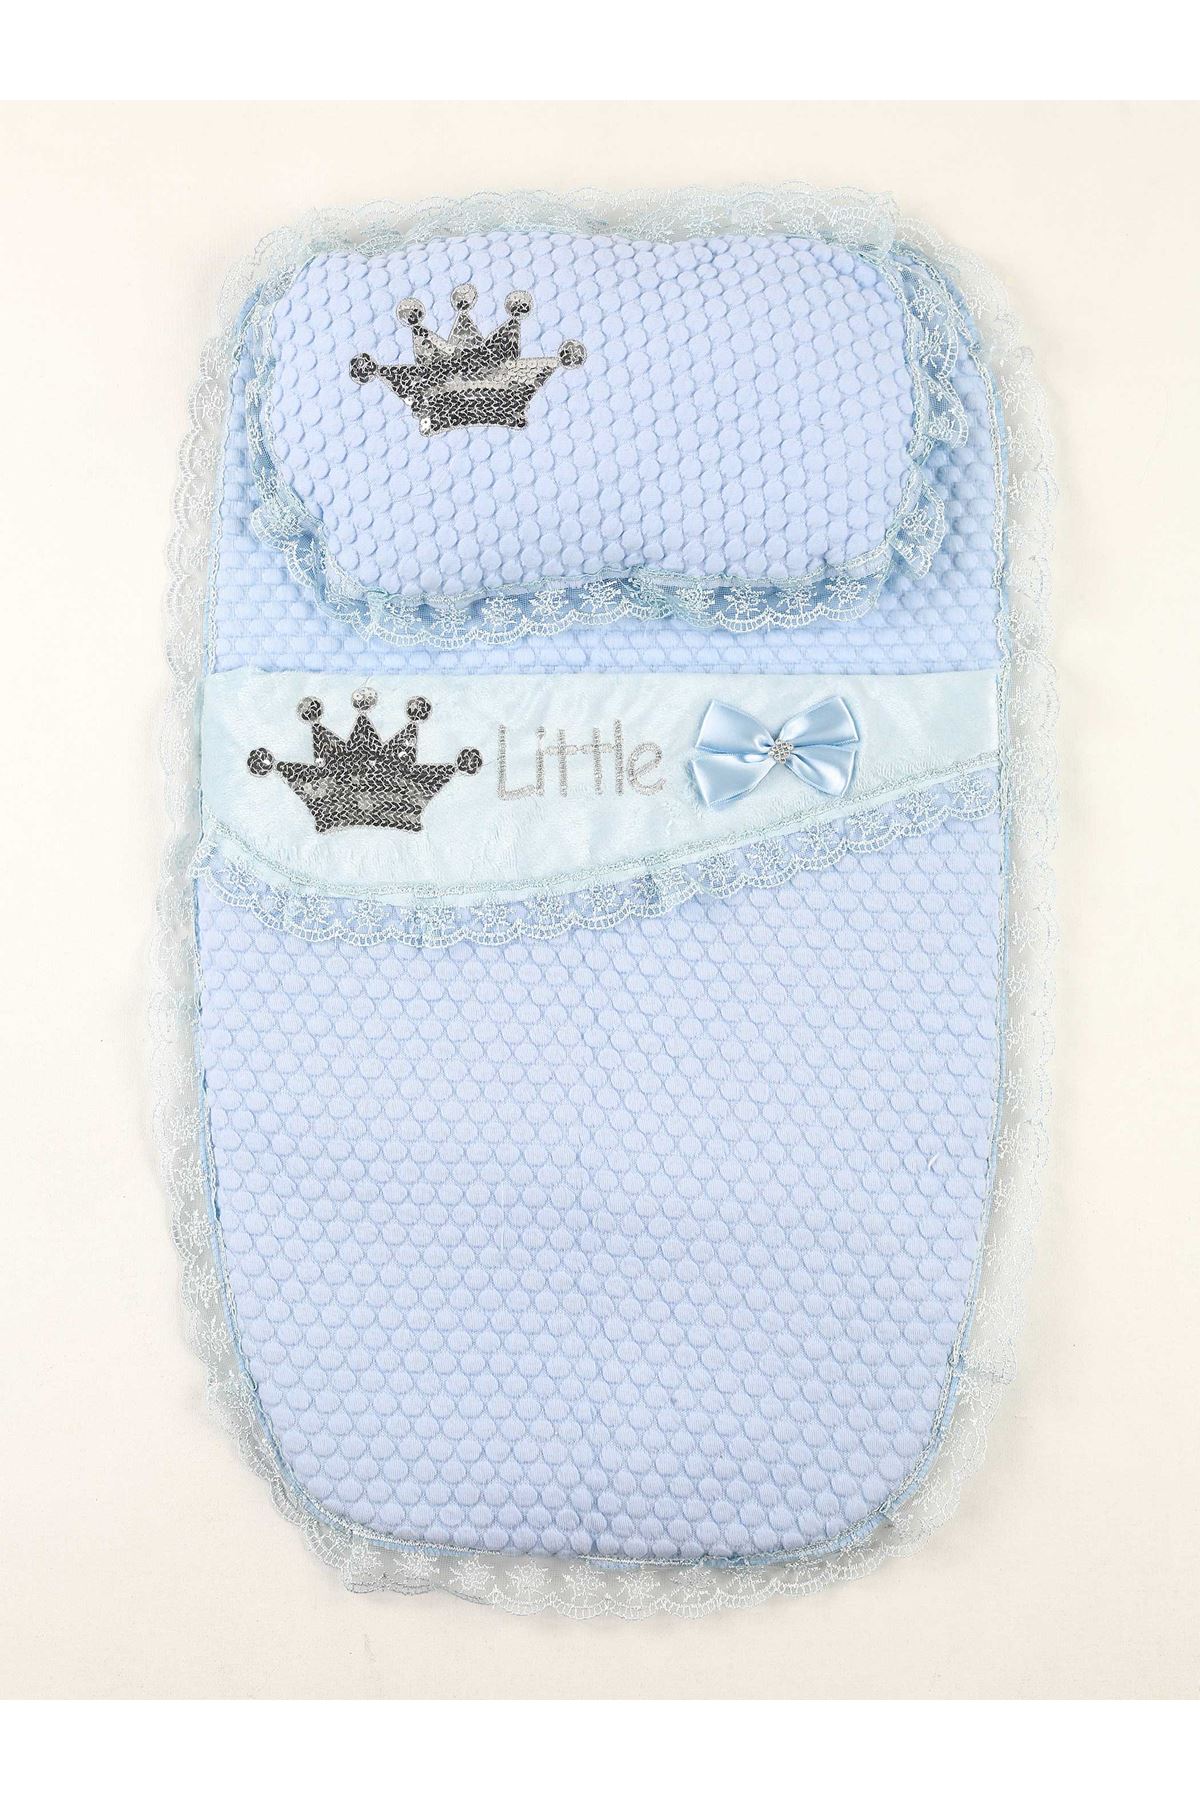 Blue Baby Boy Swaddle King Crown The Little Prince Cotton Soft Bottom Opening Babies Newborn Baby Stroller Bed Sweatproof Models